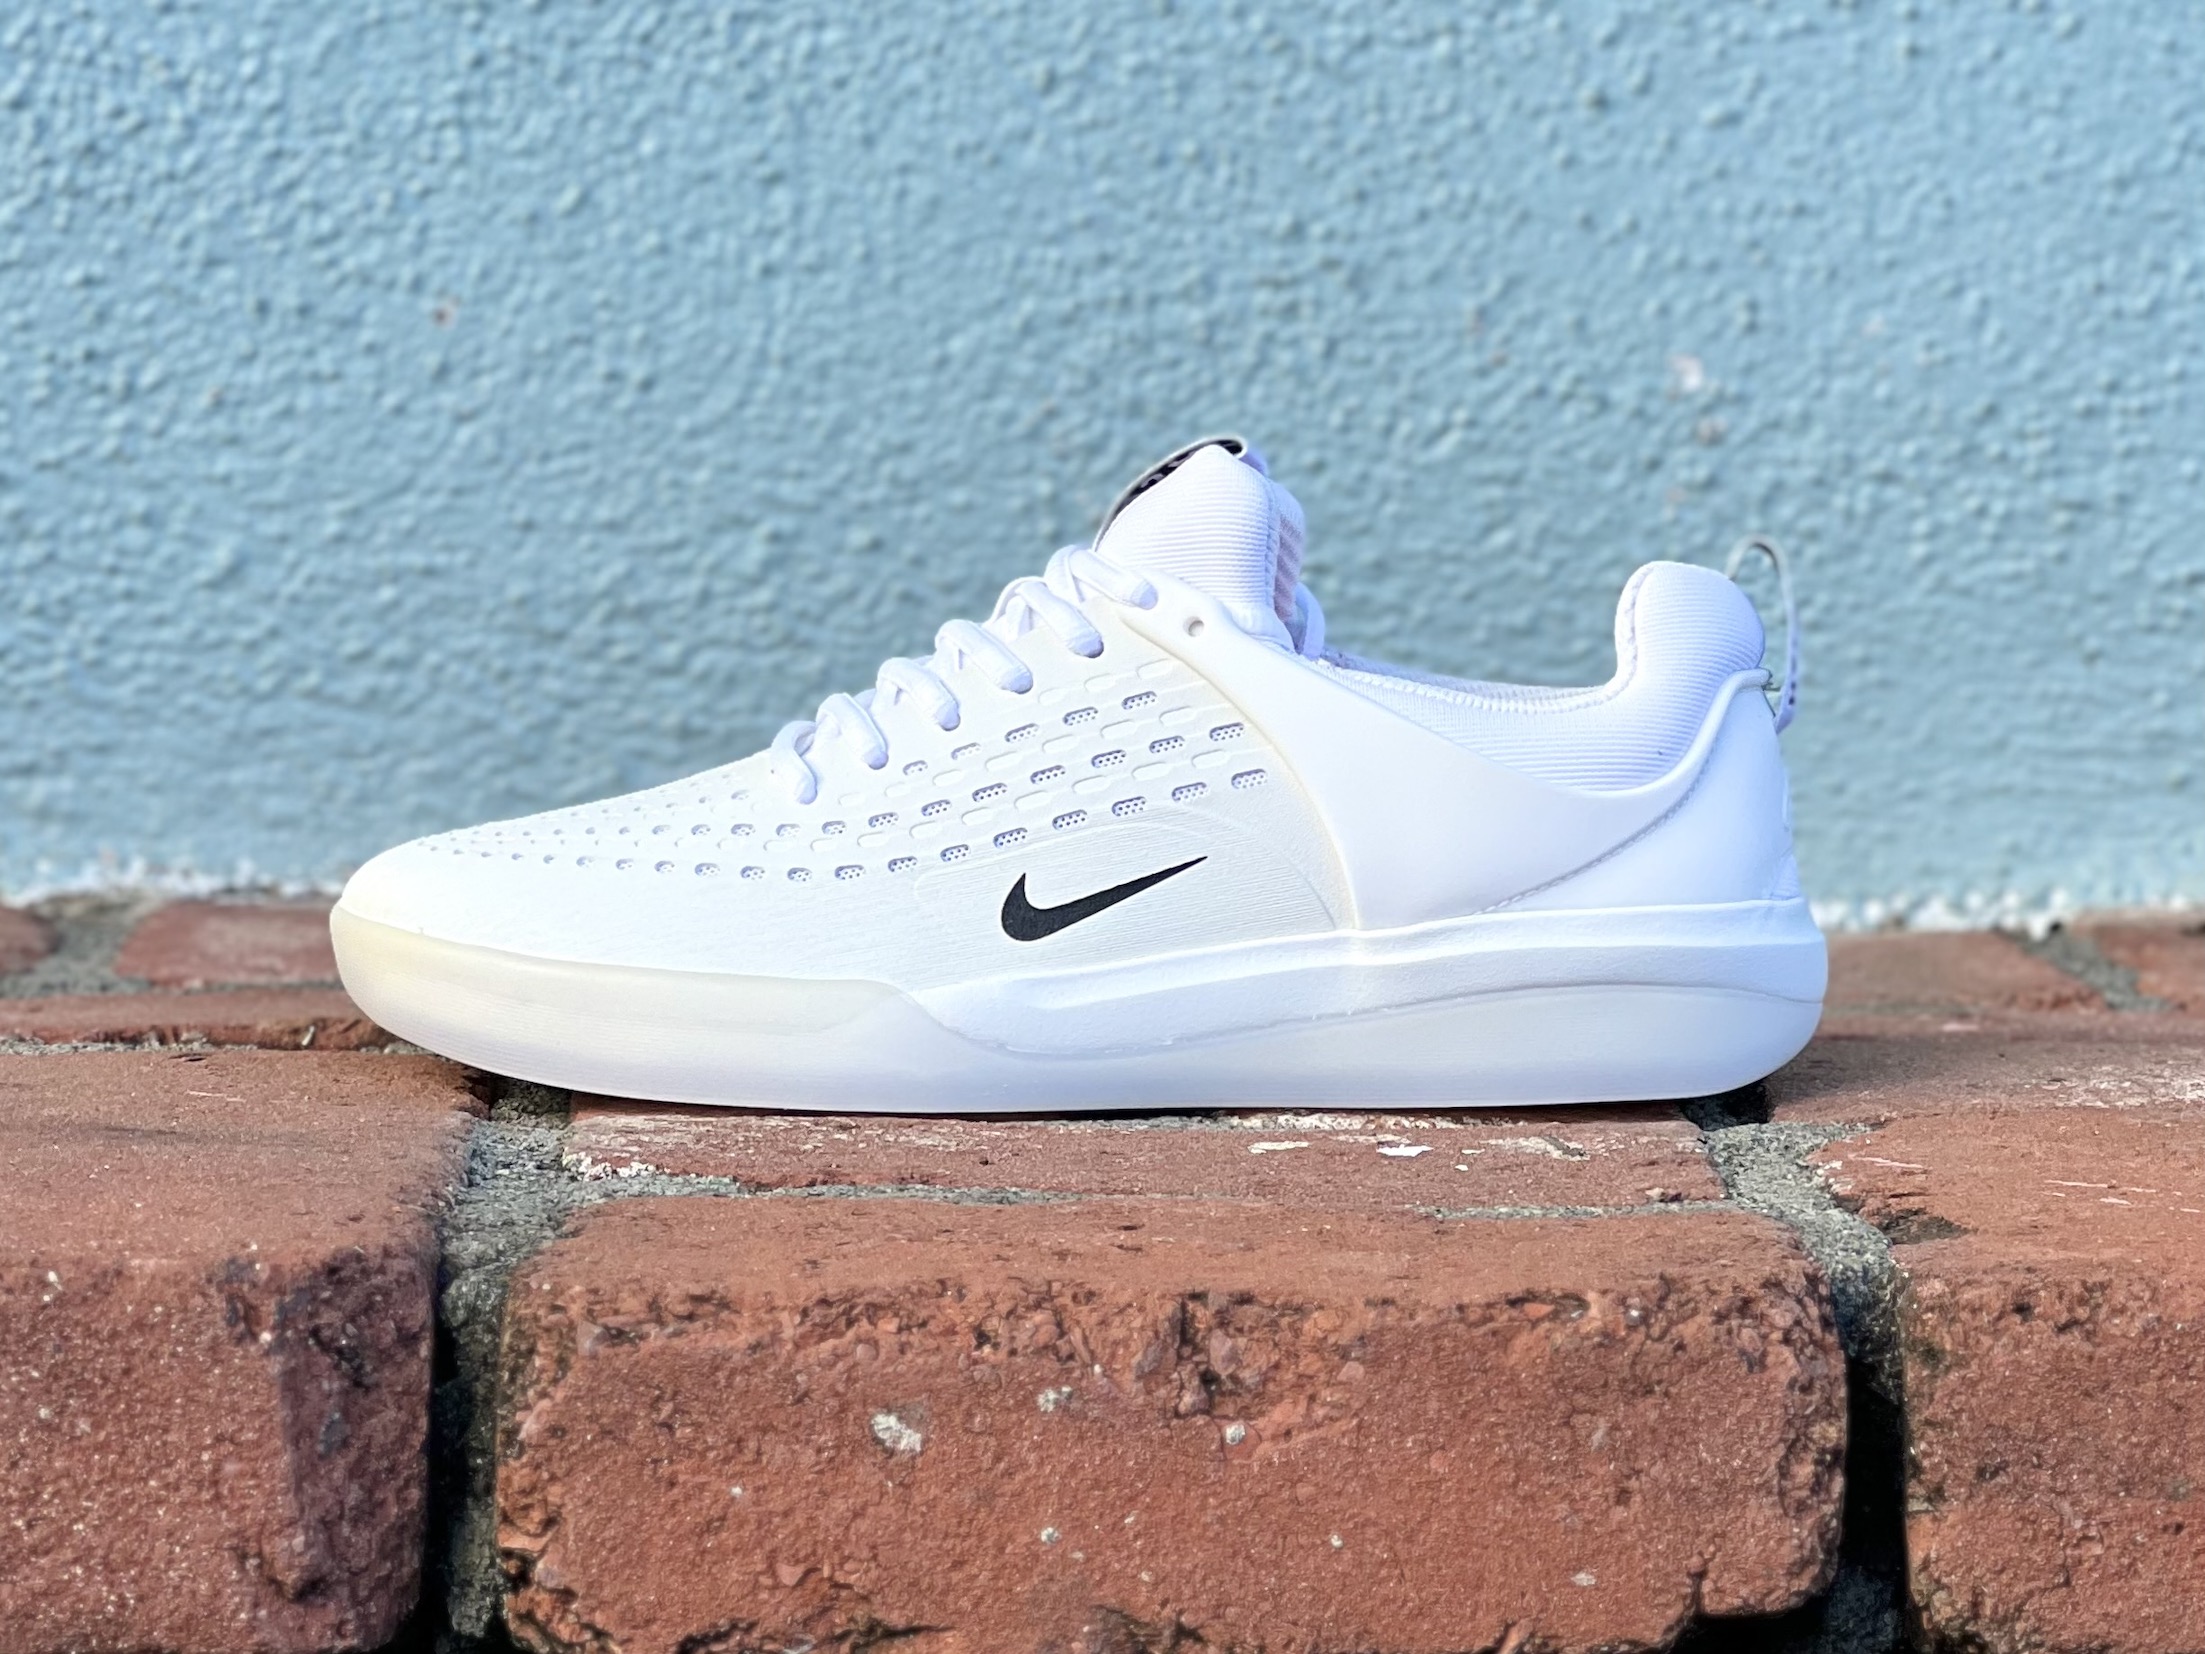 Nike SB Nyjah Pro III now available in-store